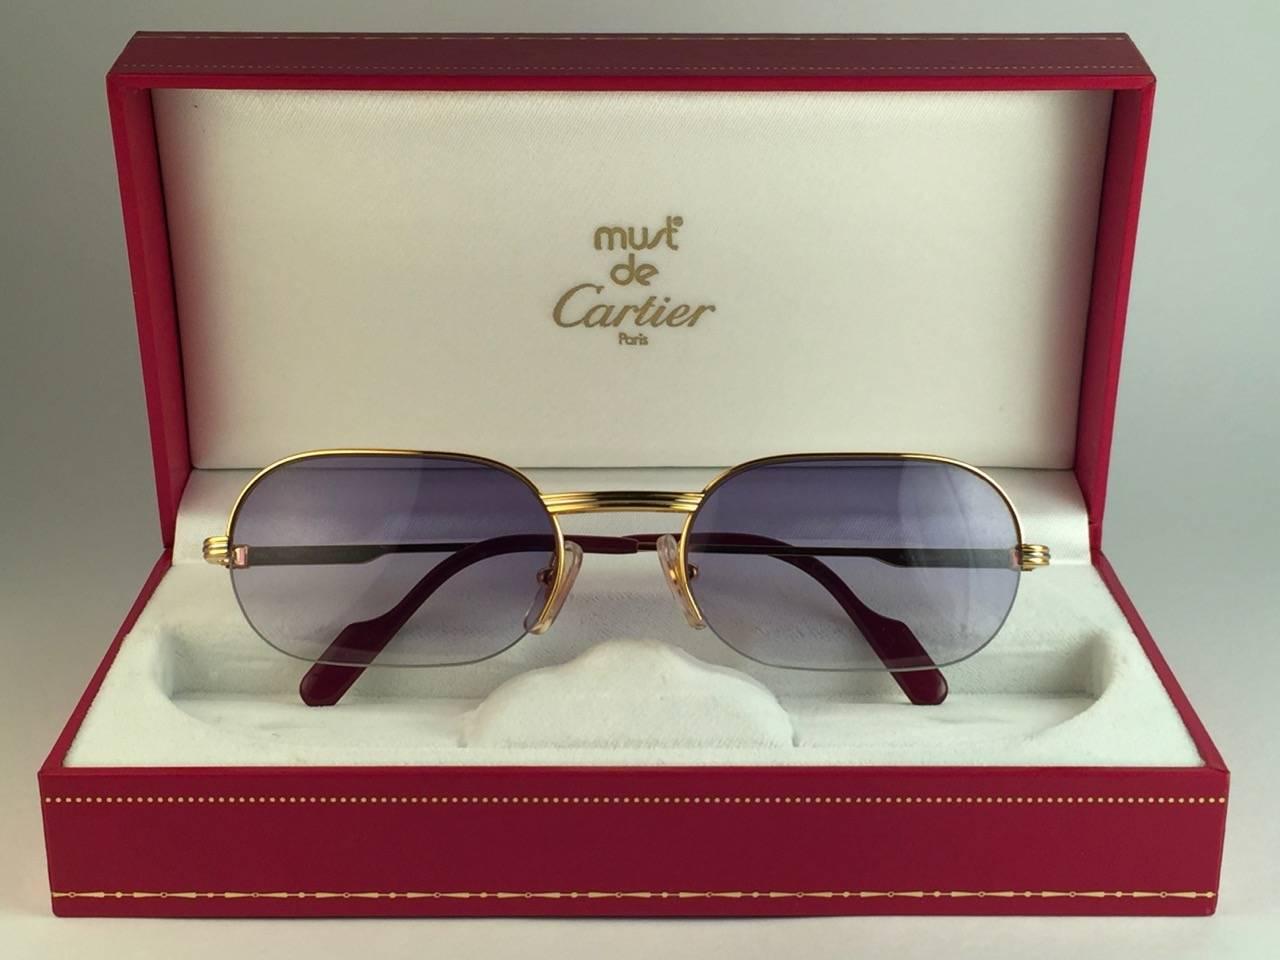 New 1983 Cartier Ascot Vendome Gold 53mm Half Frame with blue gradient (uv protection) lenses. 
Frame is with the front and sides in white and yellow gold heavy 18k plated accents. All hallmarks. Burgundy with Cartier gold signs on the earpaddles.